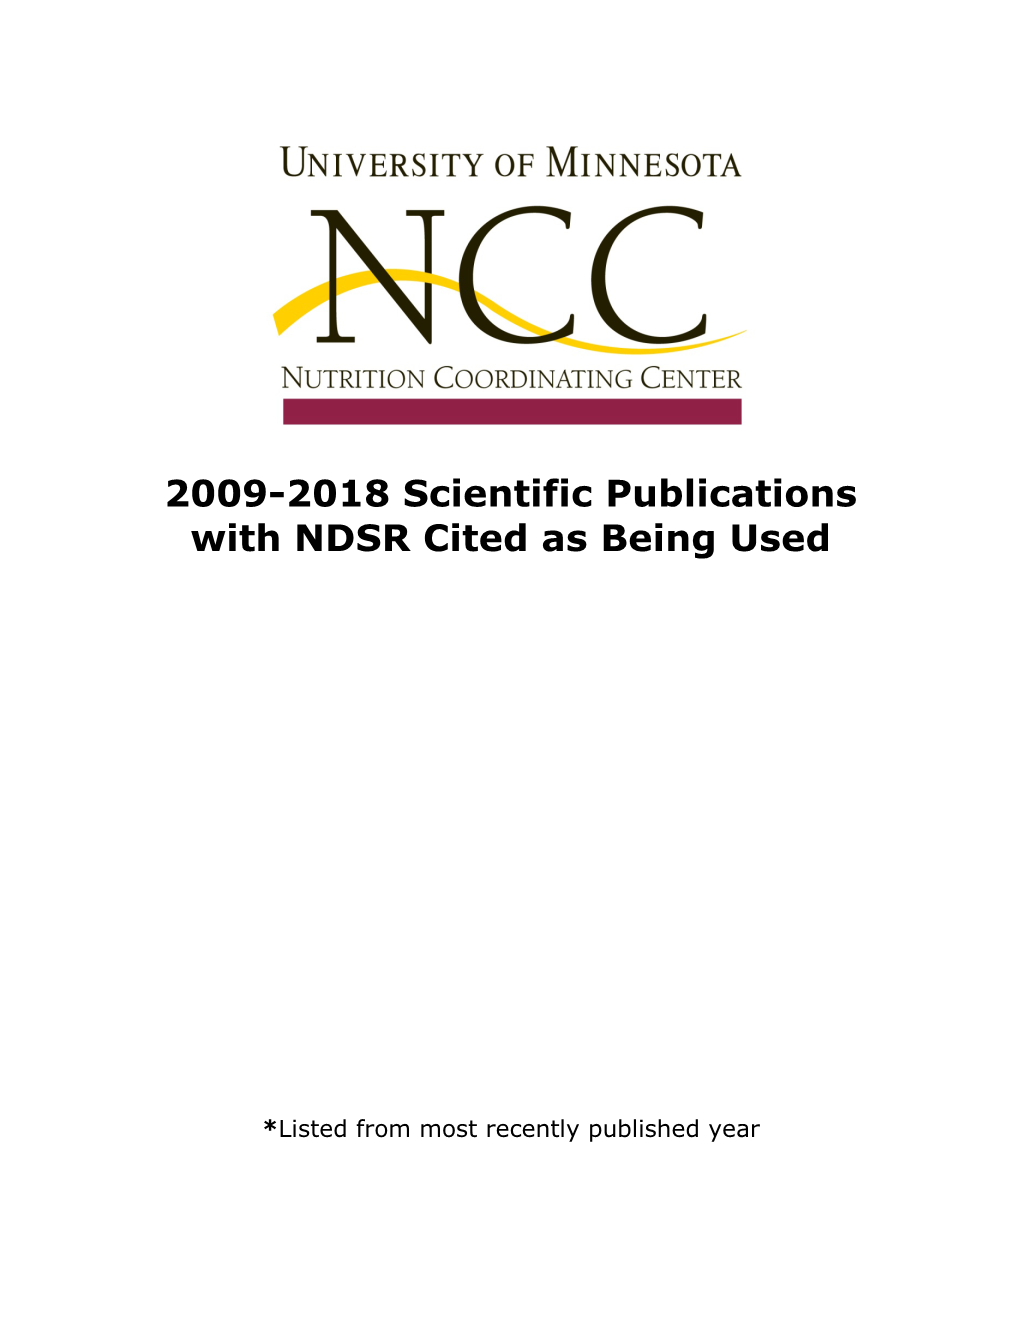 2009-2018 Scientific Publications with NDSR Cited As Being Used